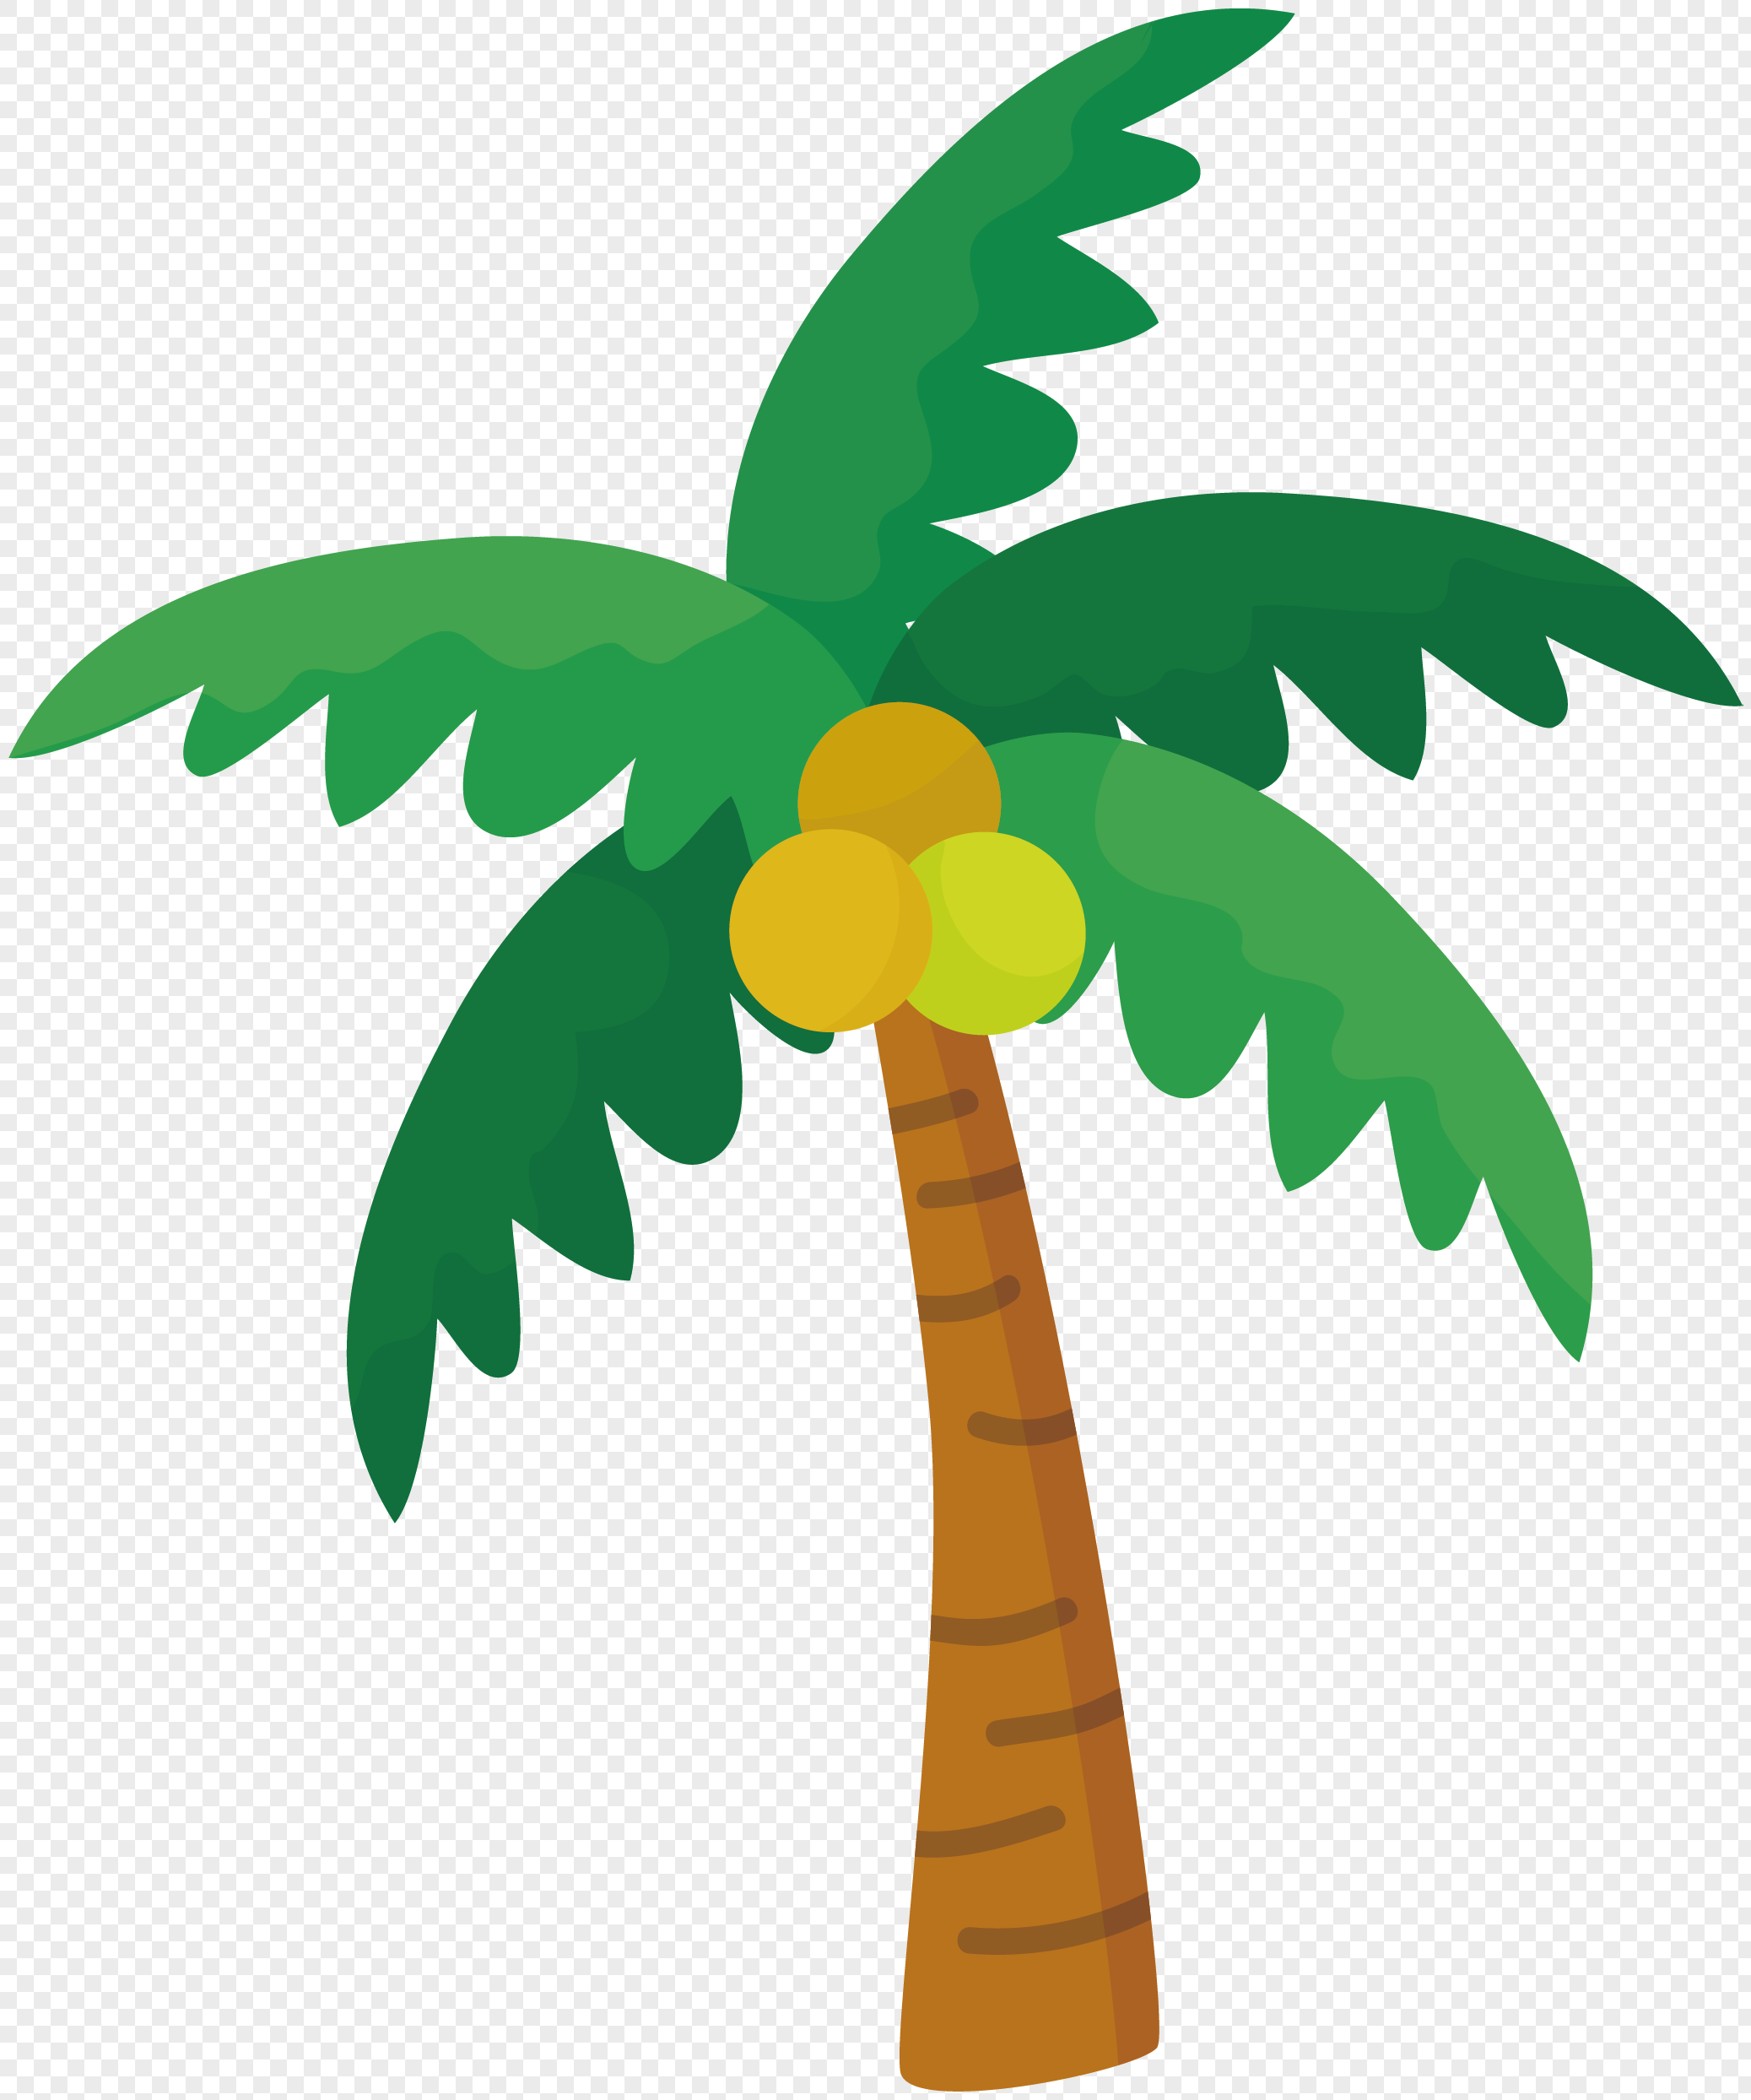 coconut-tree-vector-at-getdrawings-free-download